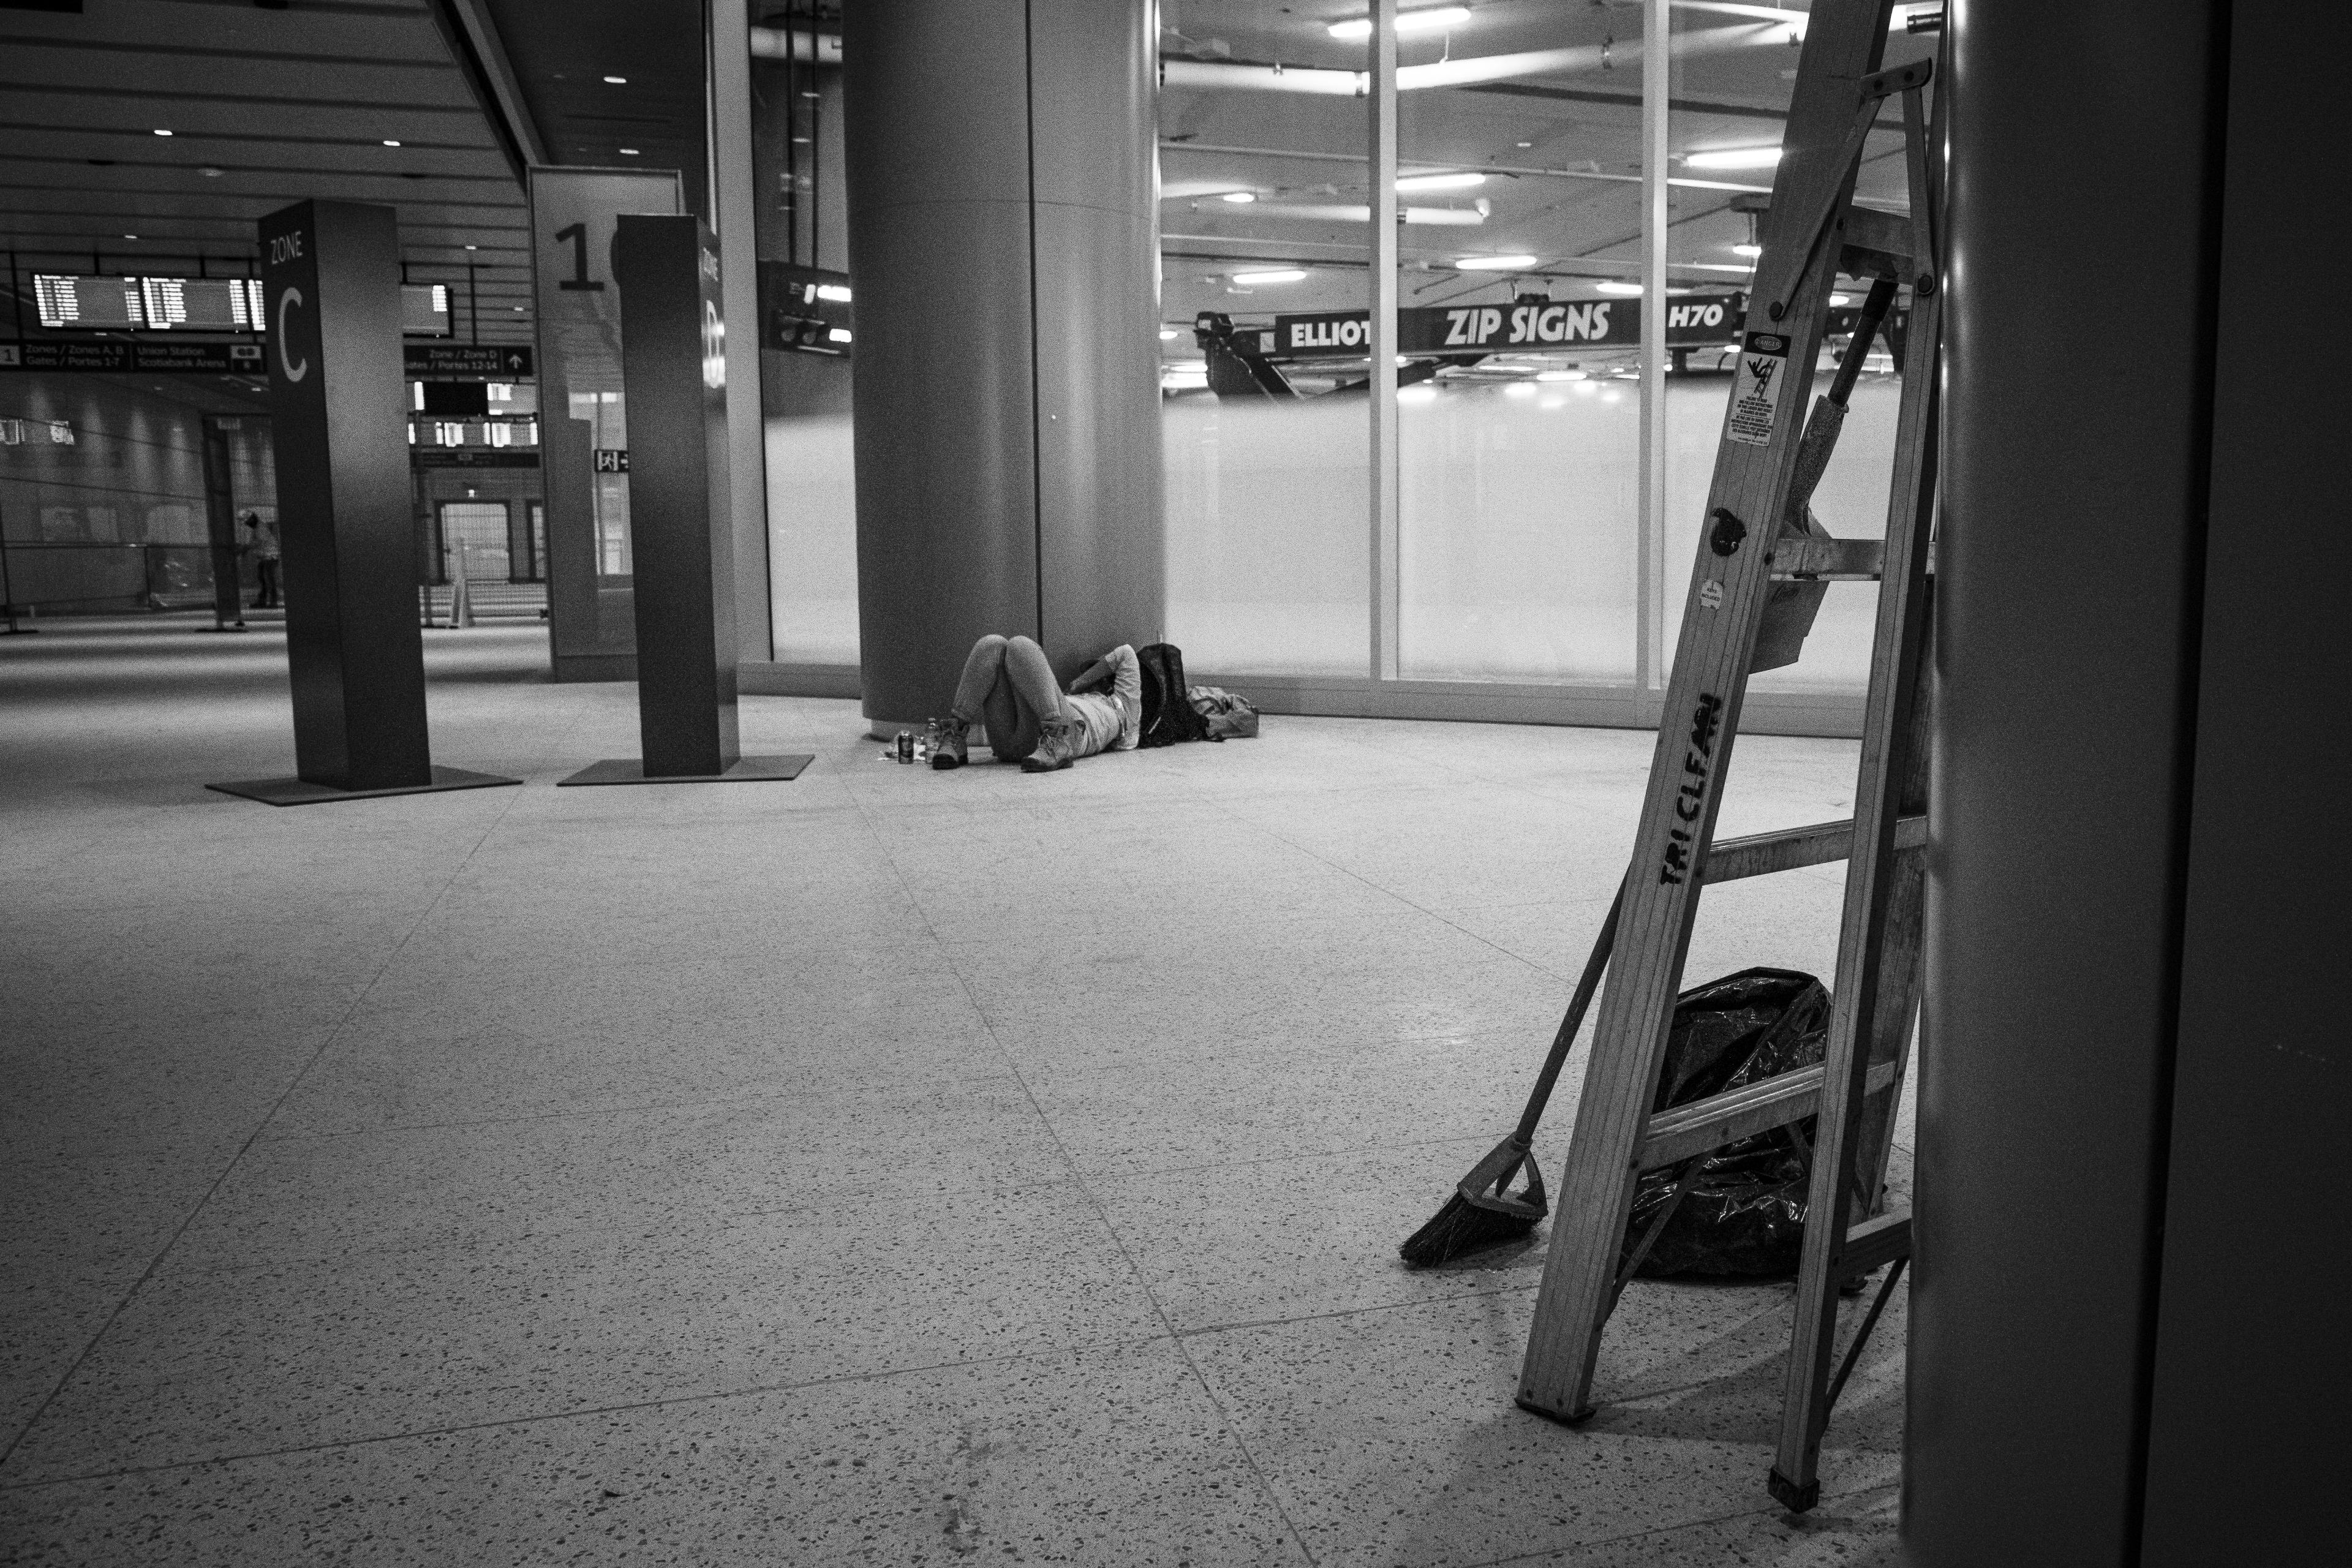 A worker relaxes on the floor.